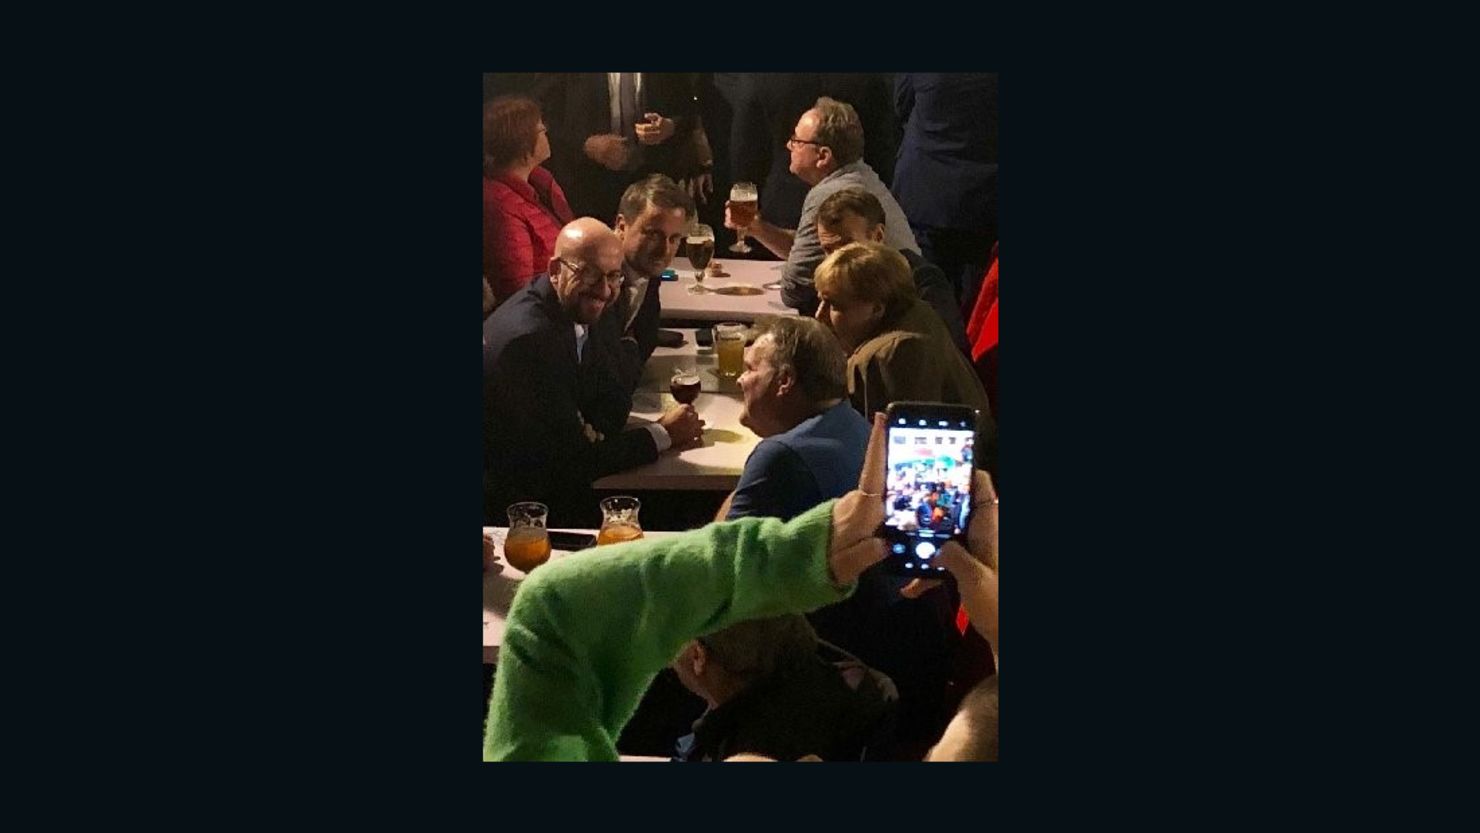 From left to right, Belgian Prime Minister Charles Michel, Luxembourg PM Xavier Bettel, French President Emmanuel Macron and German Chancellor Angela Merkel enjoy a beer in Brussels on October 17.